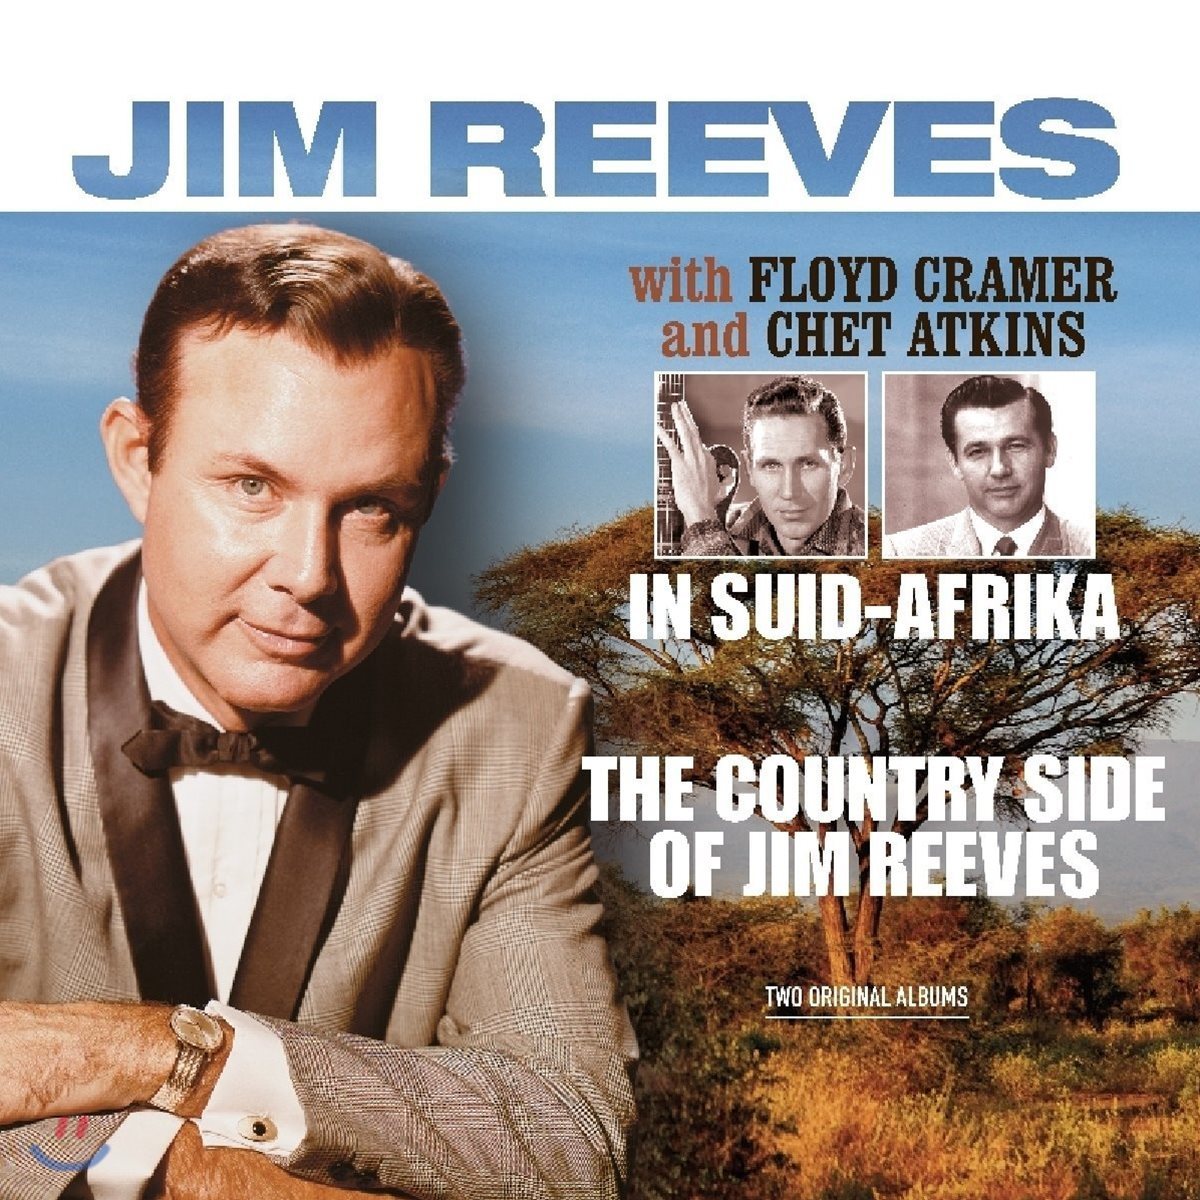 Jim Reeves &amp; Floyd Cramer (짐 리브스, 플로이드 크래머) - The Country Side Of Jim Reeves / In Suid-Afrika [LP]